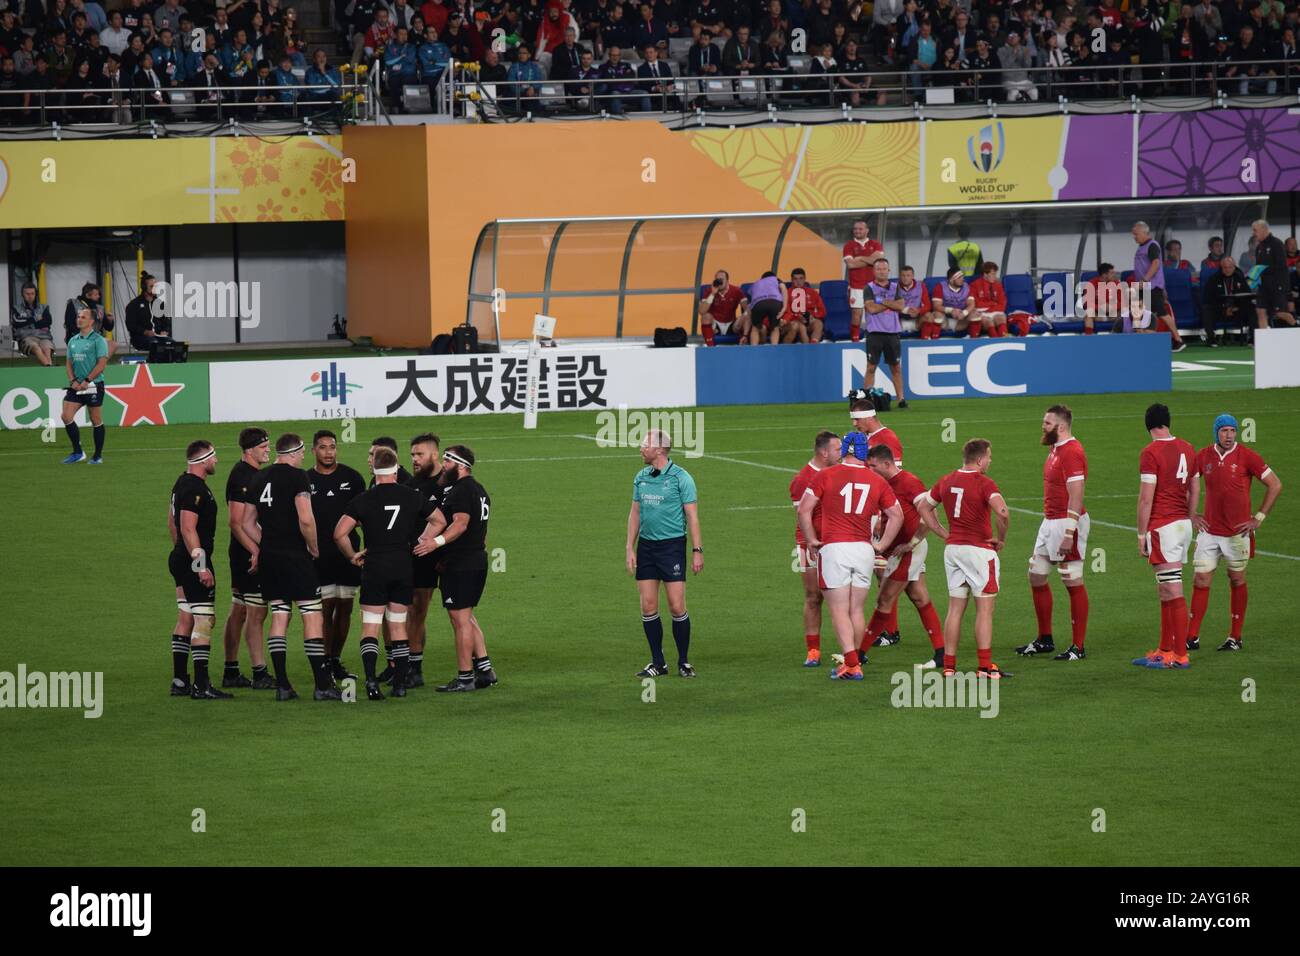 Rugby World Cup 2019, Bronze Final. Wales v New Zealand Stock Photo